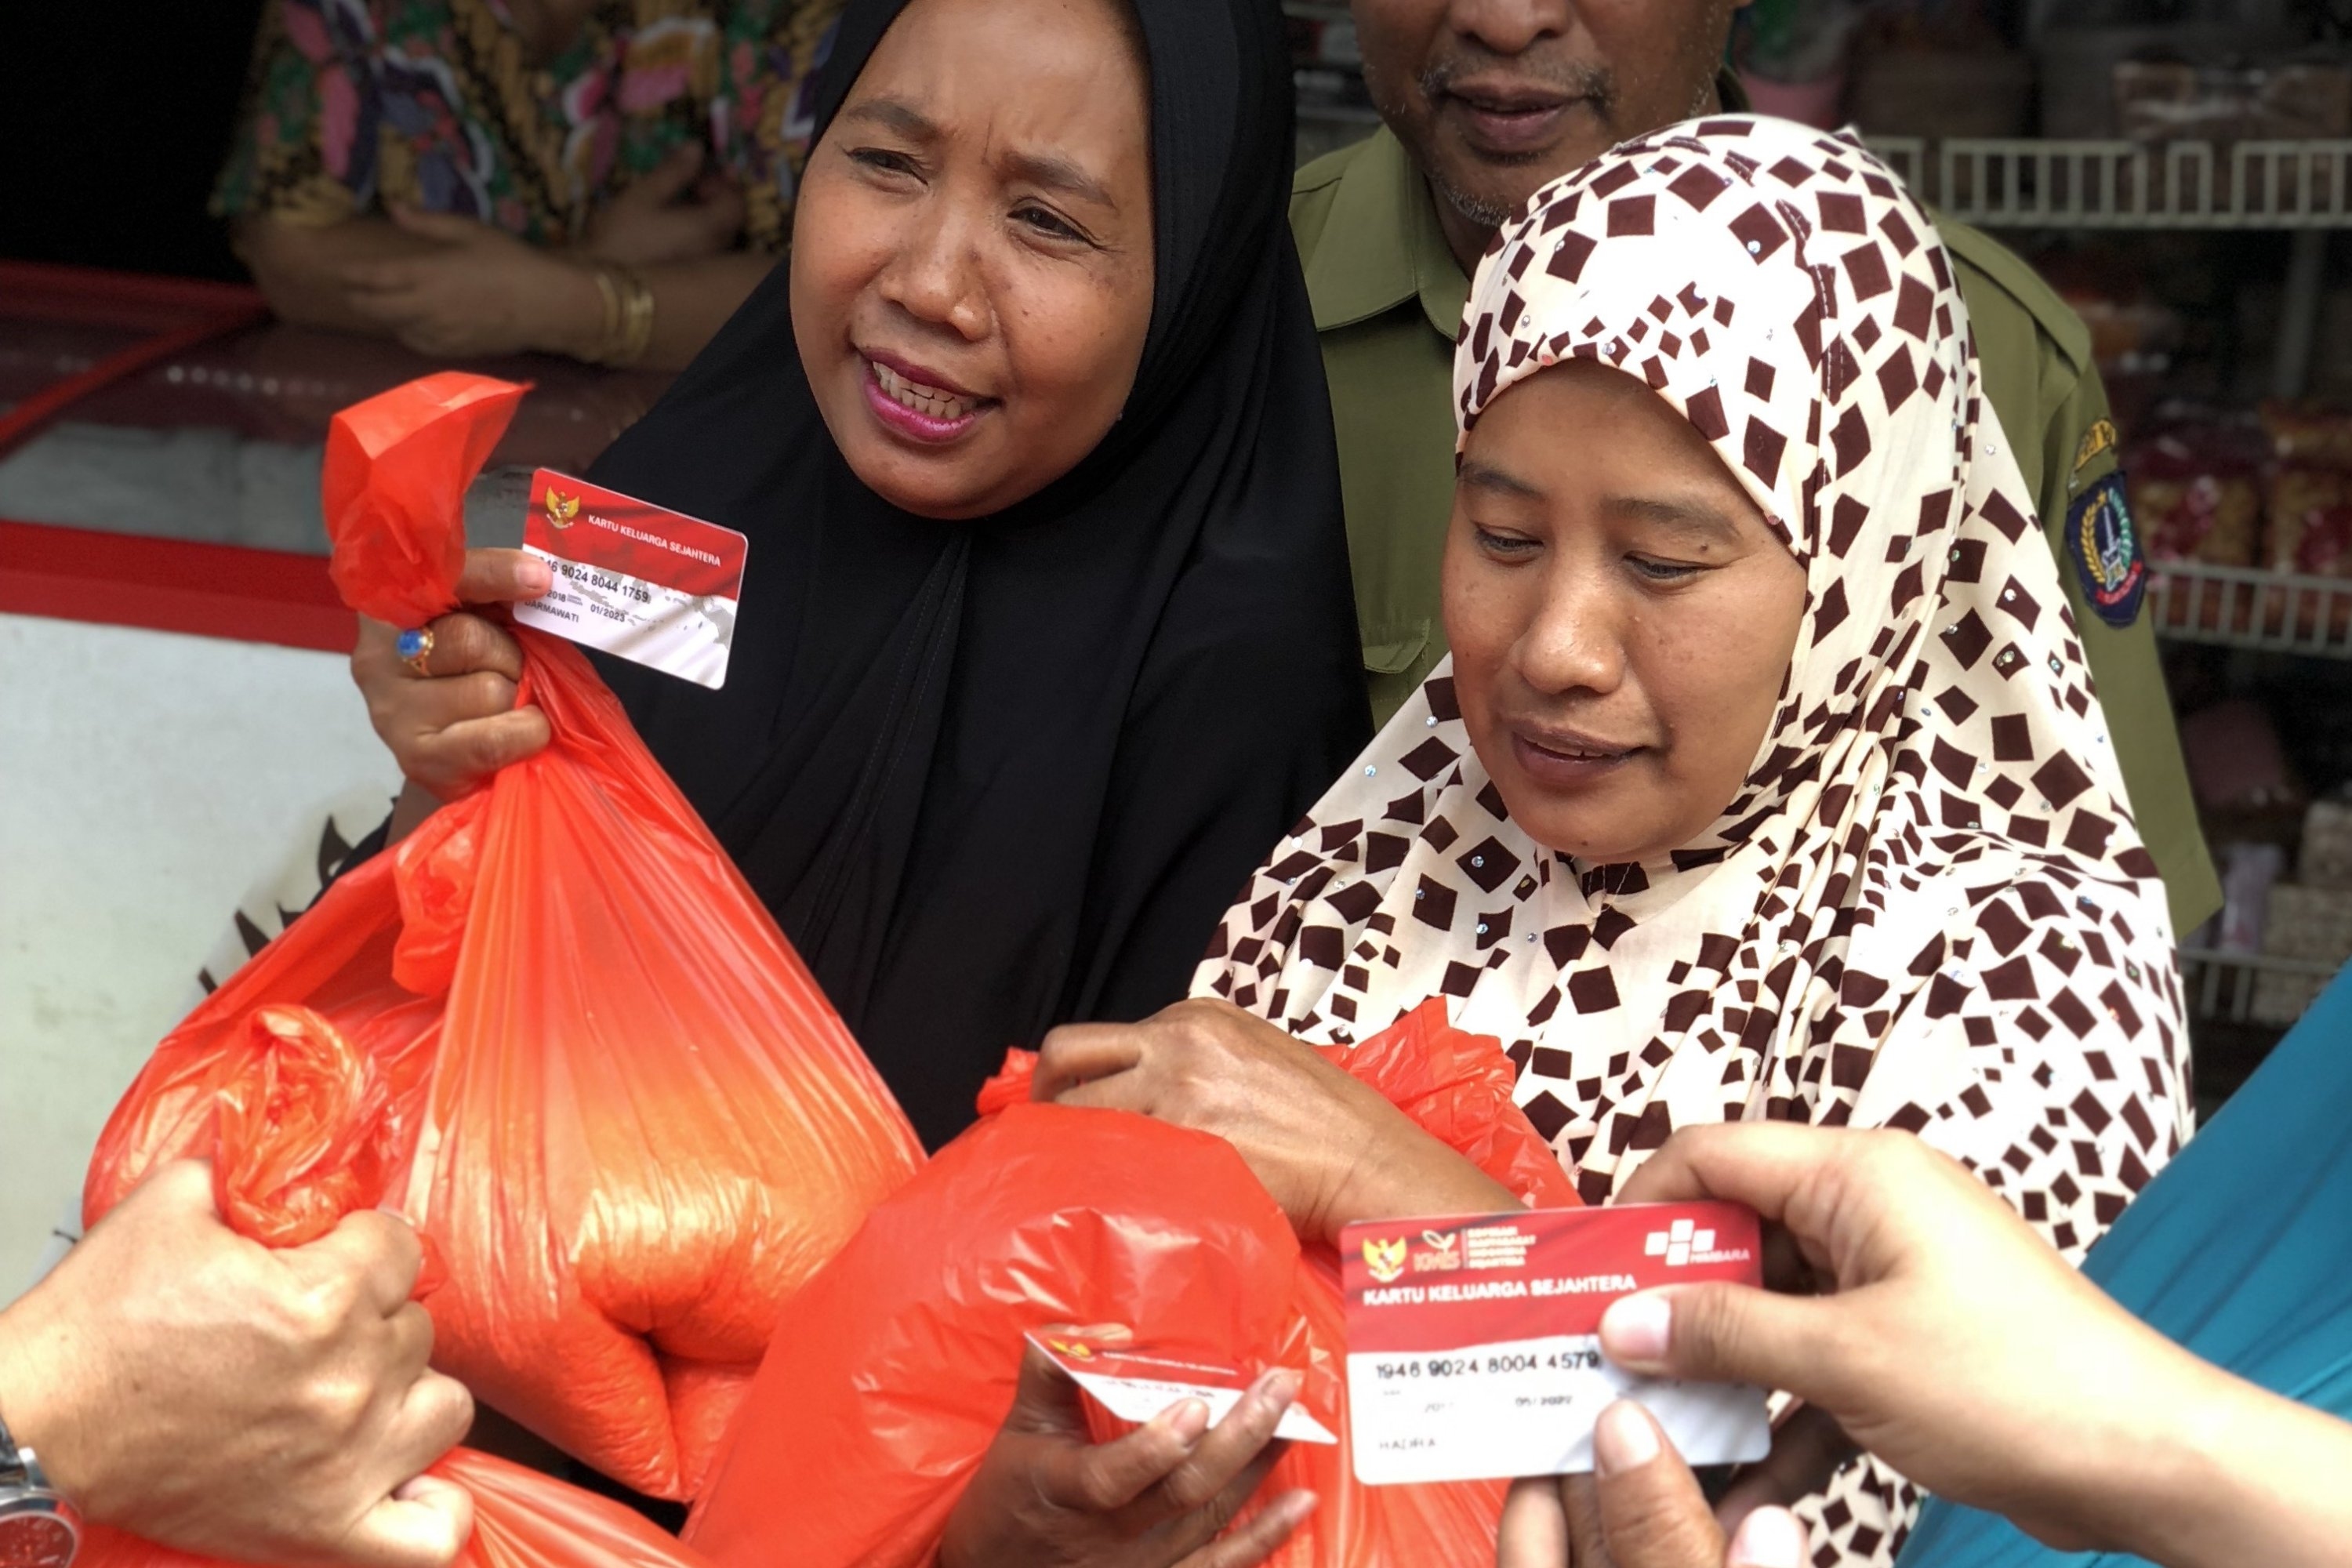 Women in South Sulawesi, Indonesia, purchase subsidized rice under Indonesia's Non-Cash Food Assistance program, one of many social assistance programs evaluated by J-PAL affiliates.